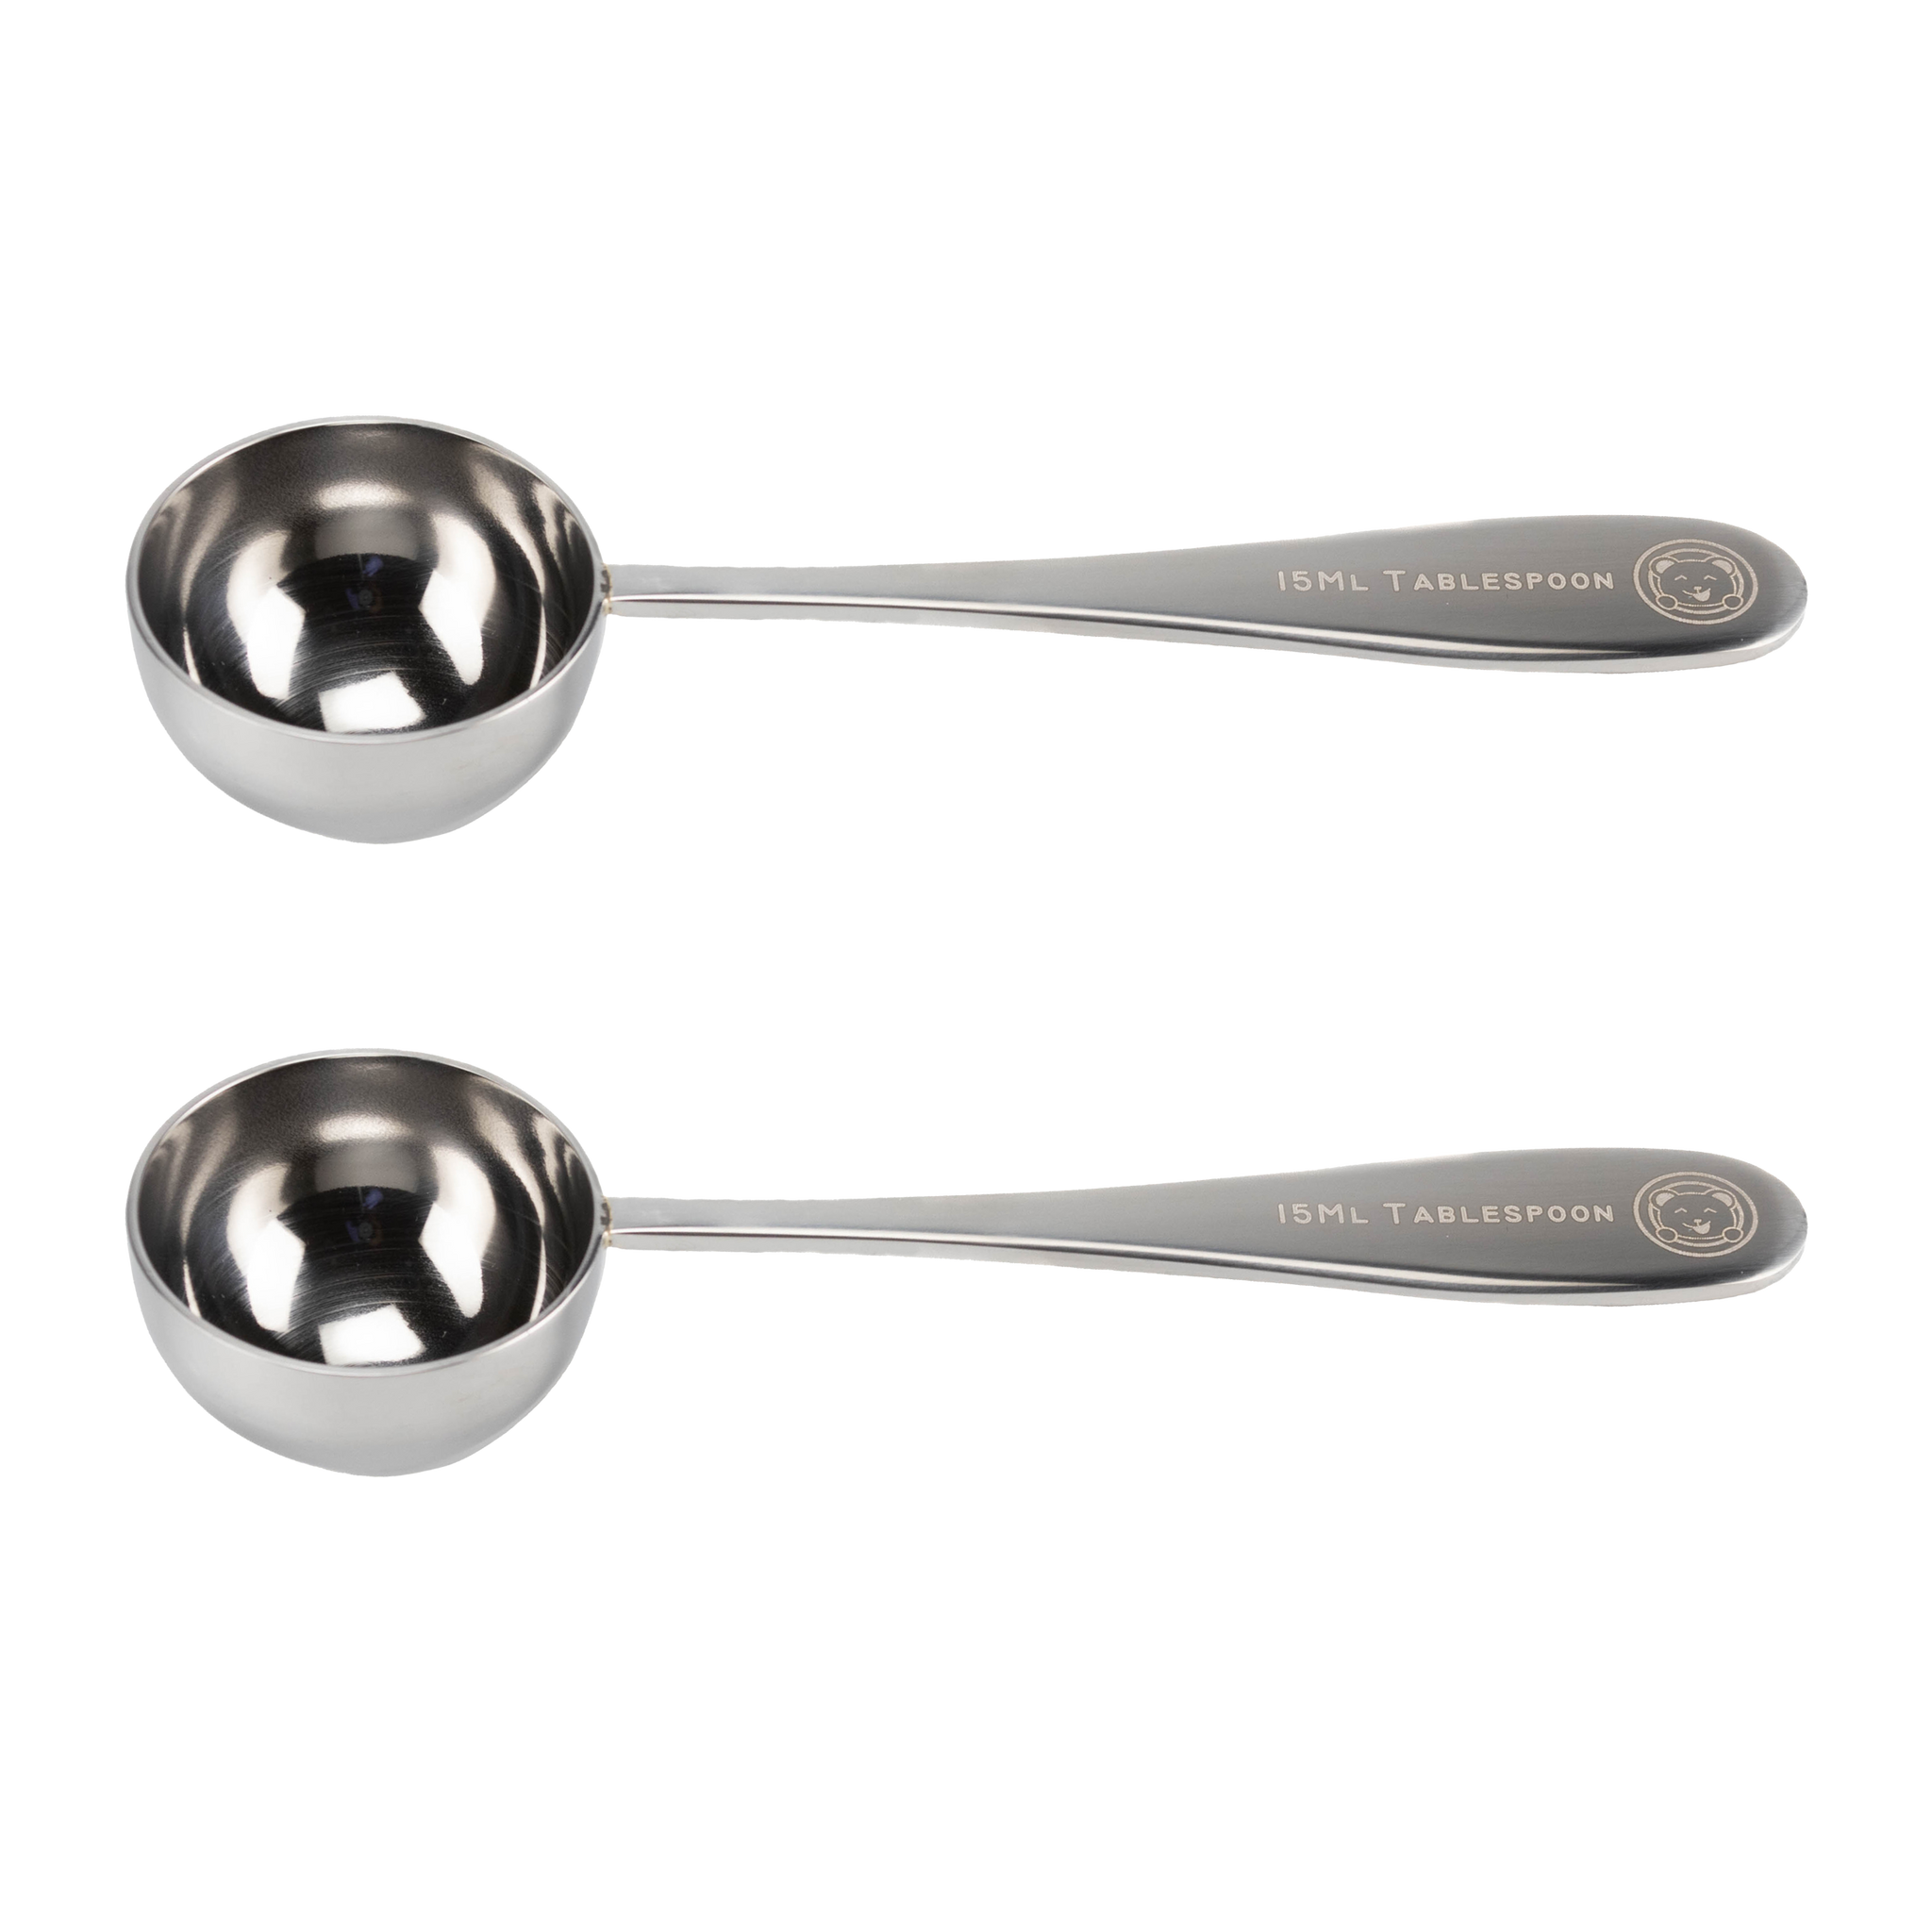 Is the plastic spoon 1 tablespoon? Or is the metal one about 2